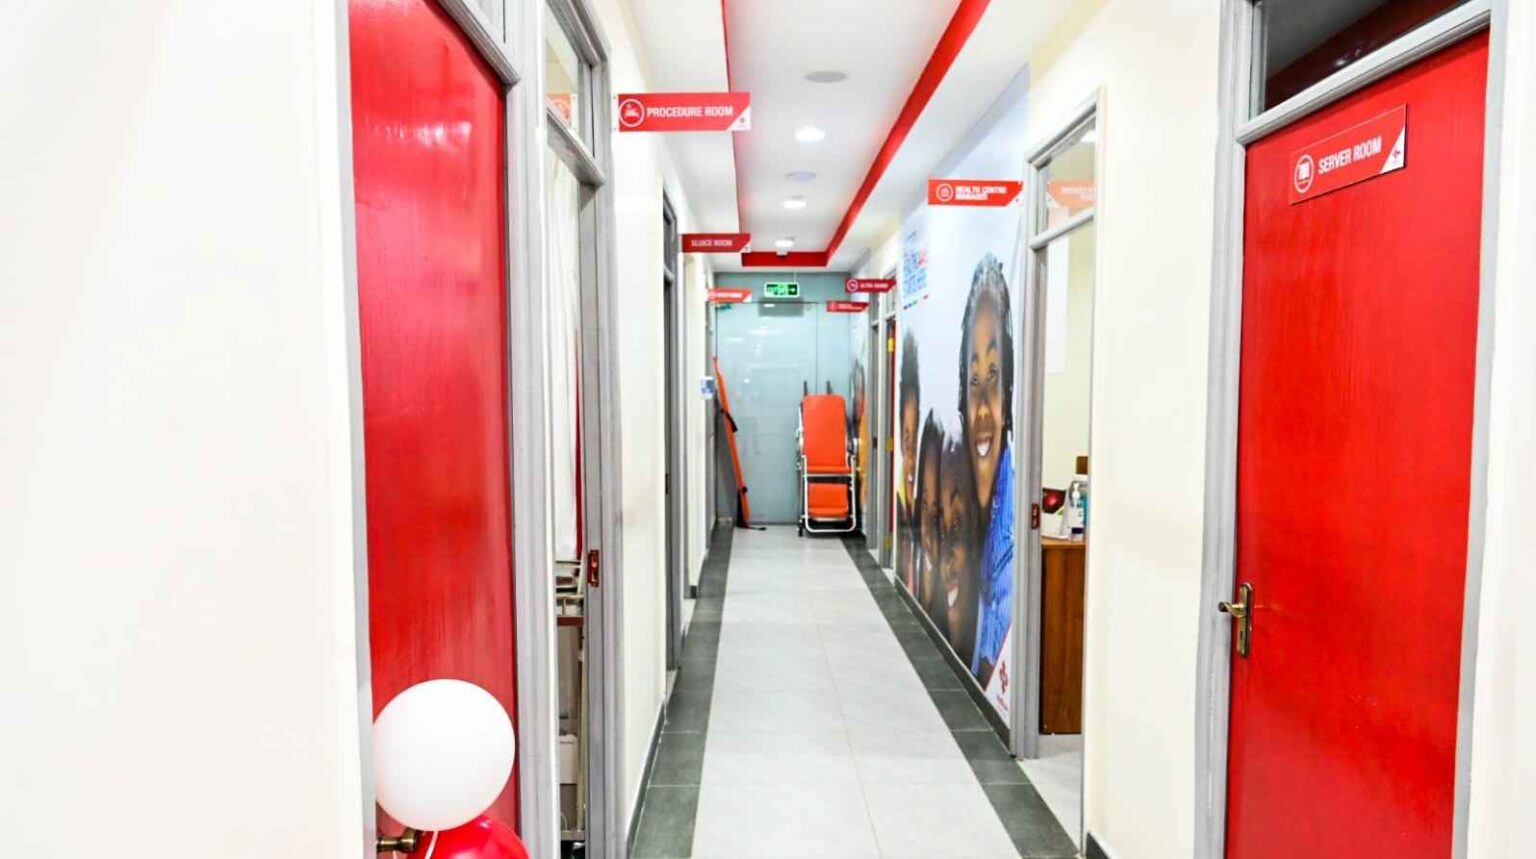 AAR Healthcare Kenya's success is attributed to its commitment to providing quality and affordable healthcare.